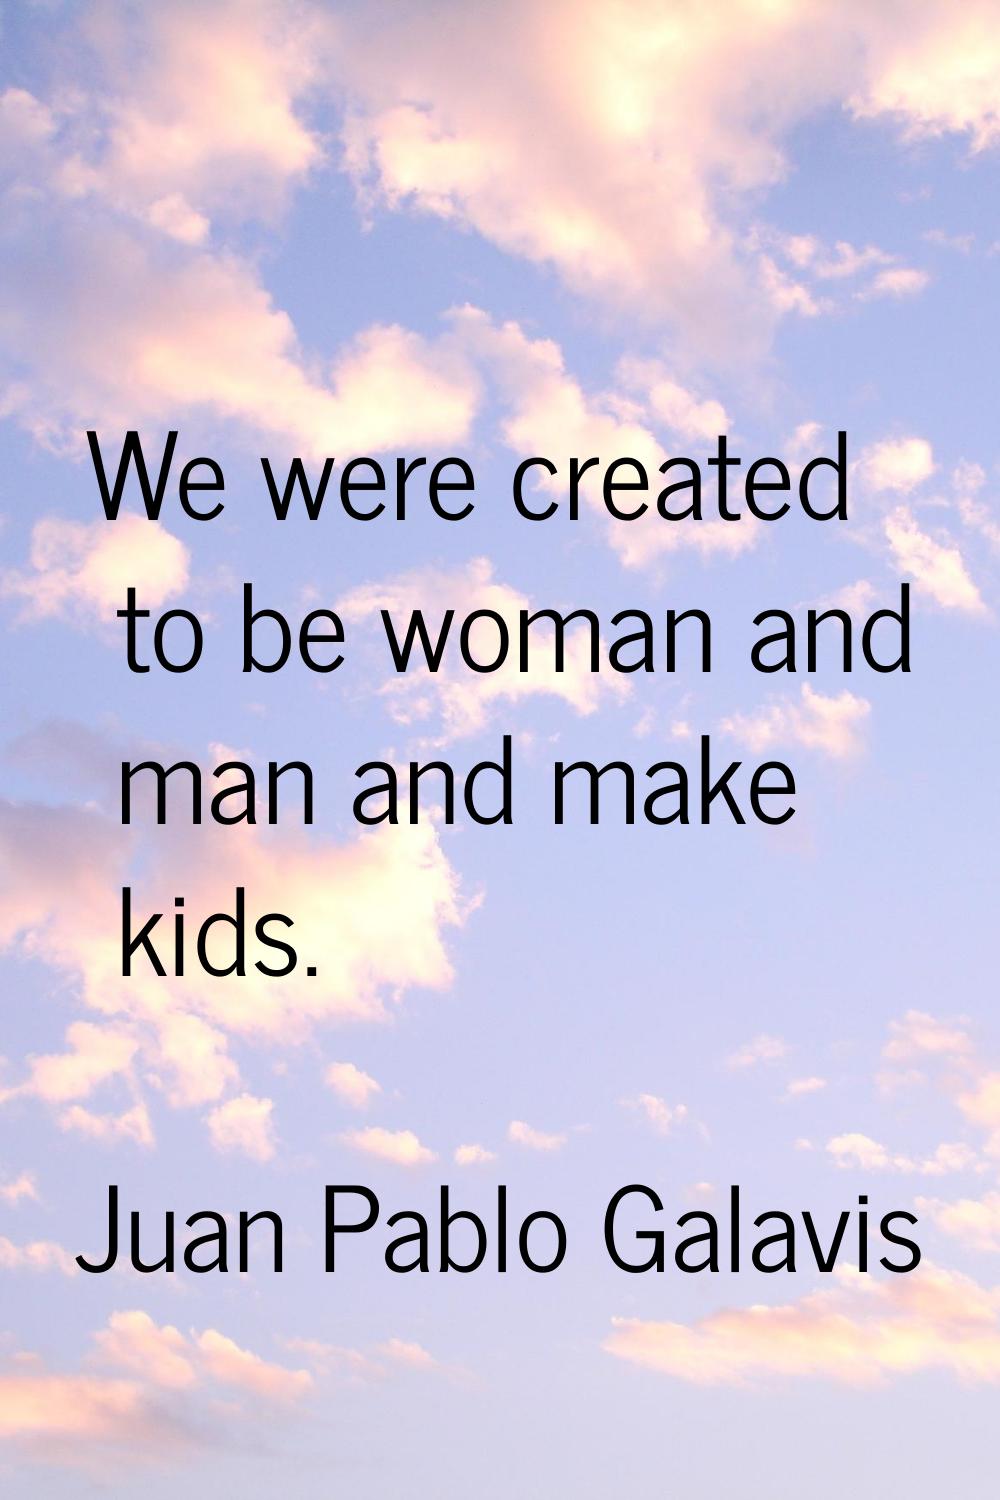 We were created to be woman and man and make kids.